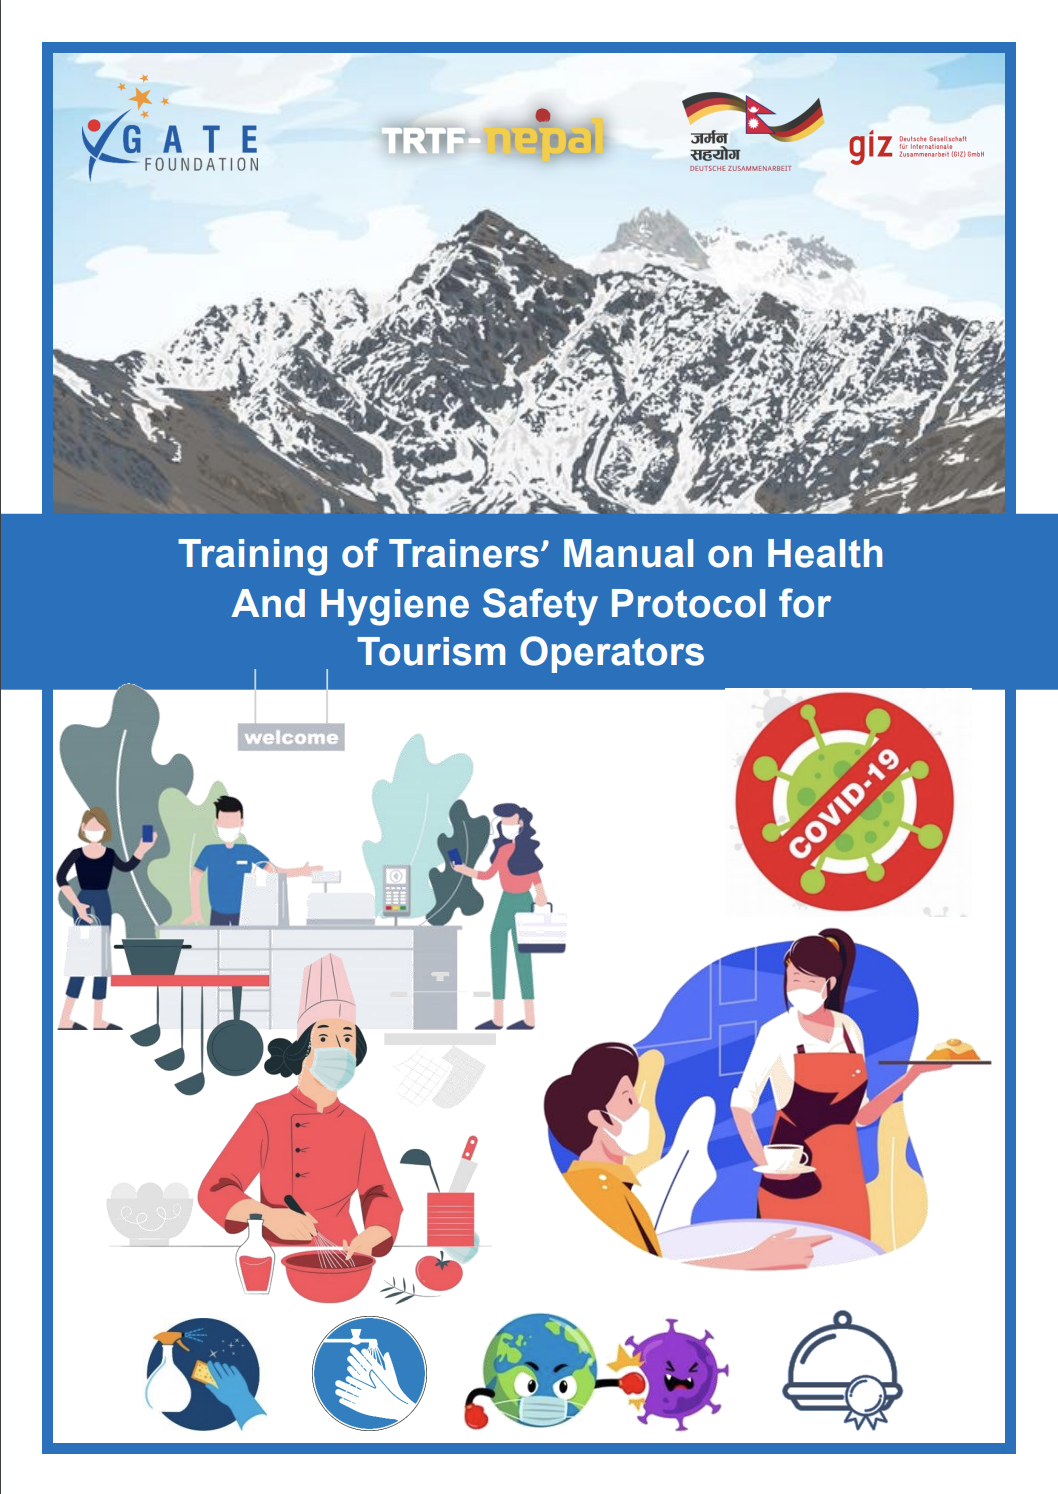 Training of Trainers' Manual on Health and Hygiene Safety Protocol for Tourism Operators